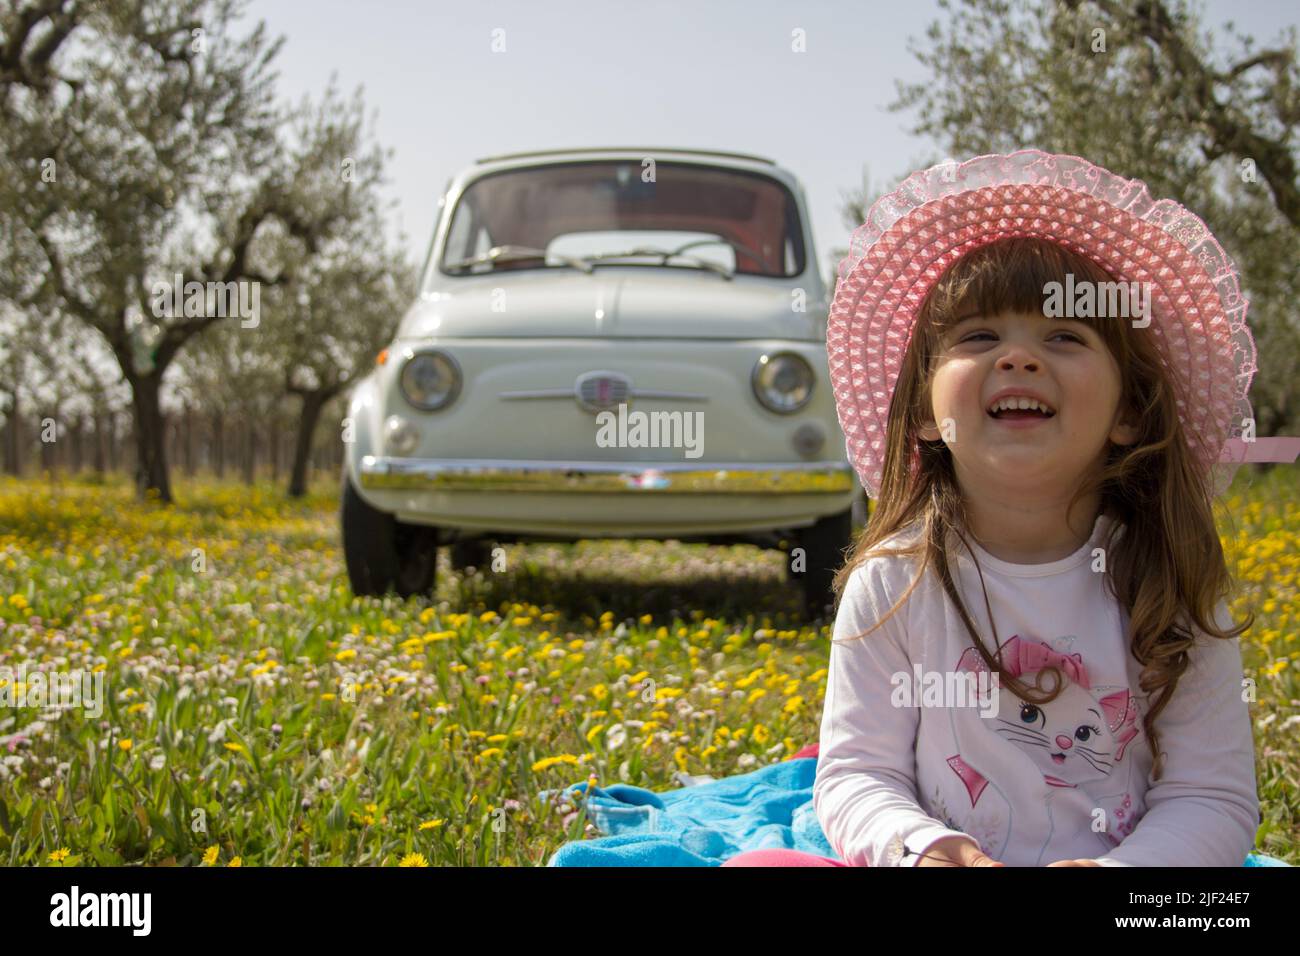 Adorable and beautiful smiling little girl sitting in a flowery meadow with an old Italian Fiat 500 car in the background. Vacation in Florence, Stock Photo